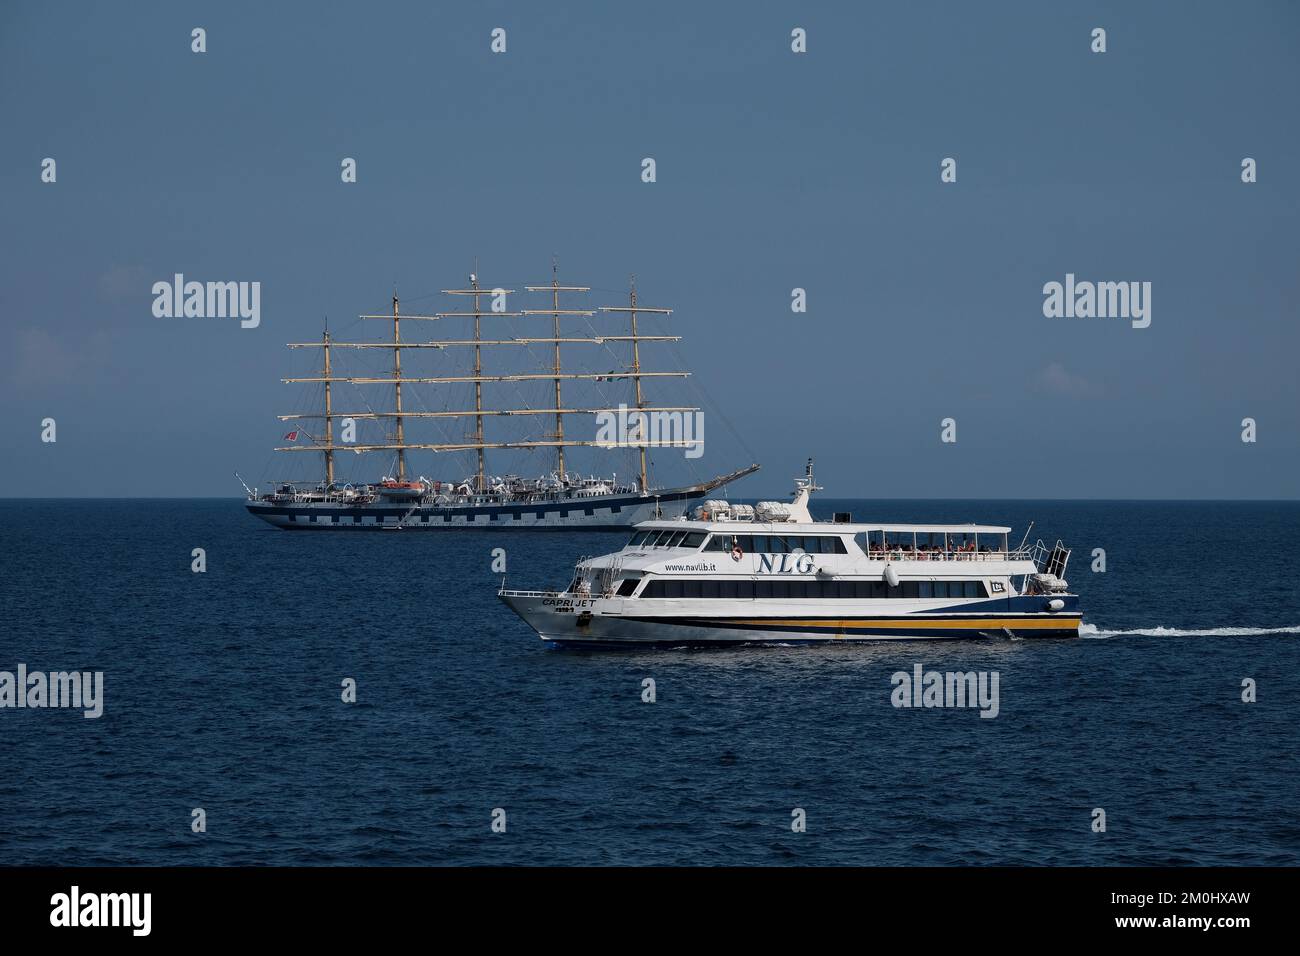 The Royal Clipper tall ship seen off the Amalfi Coast close to Positano Italy passed by a NLG Capri jet. Stock Photo